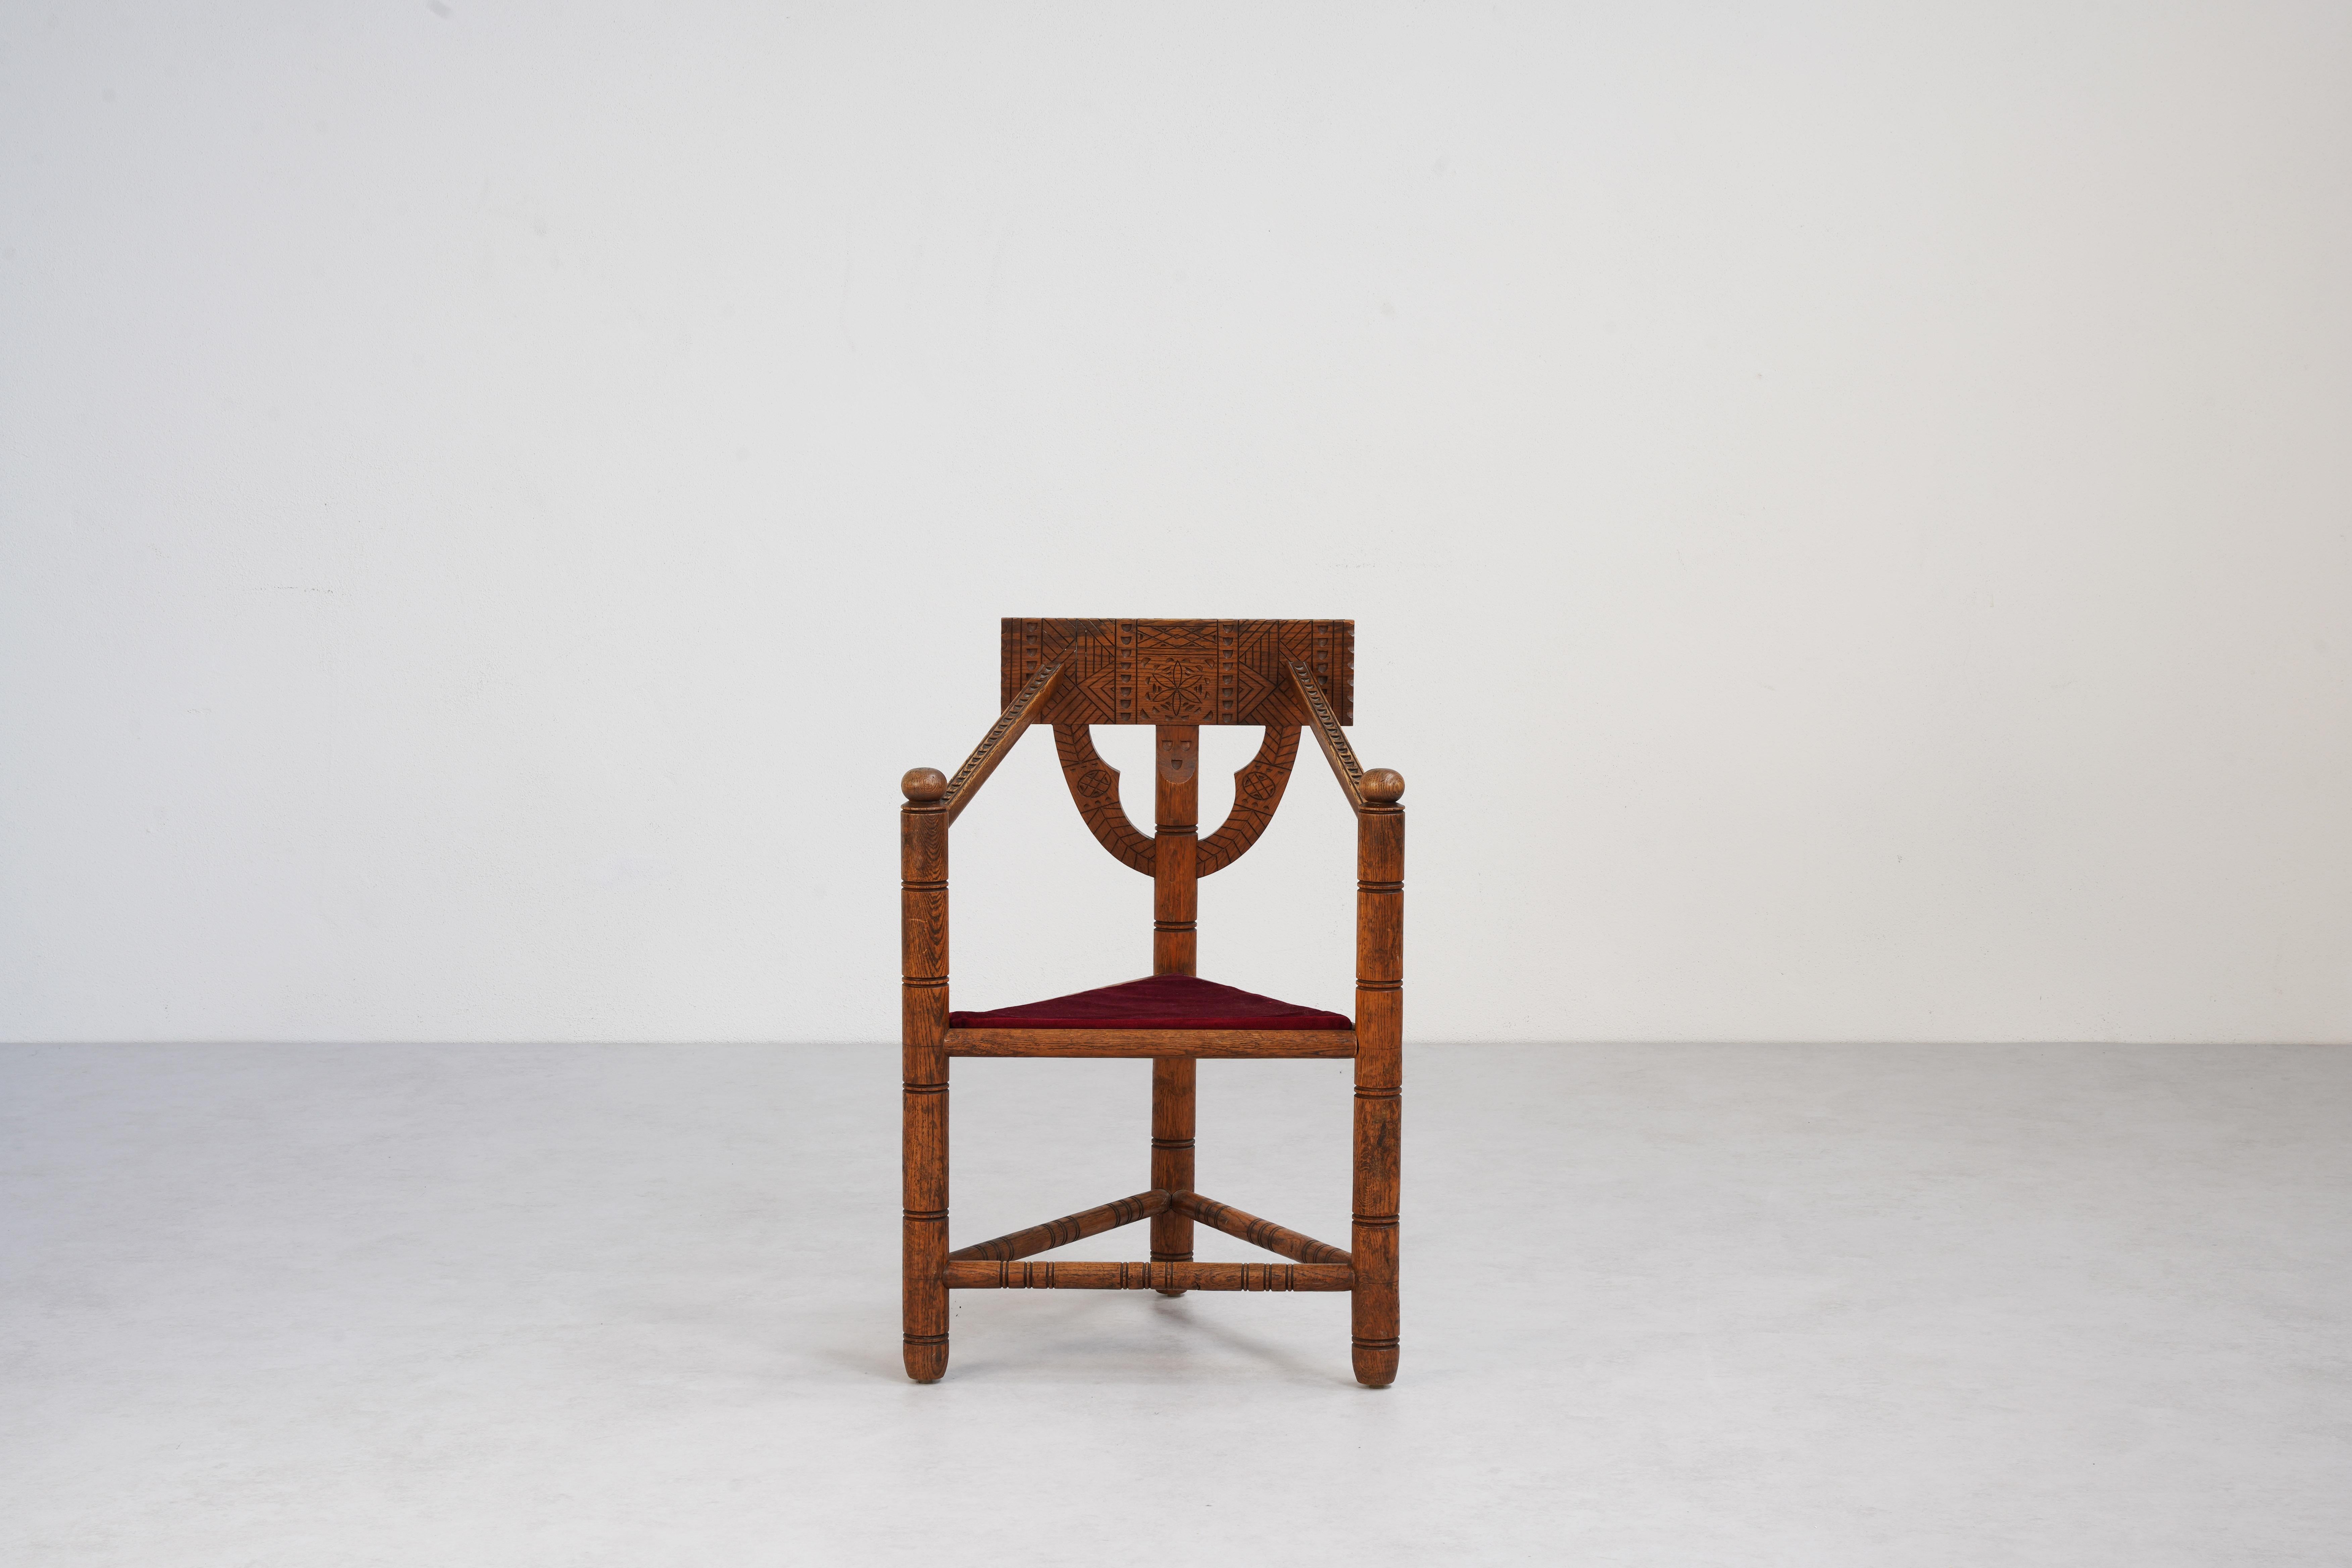 1930s Masterpiece: Carved Oak Chair with Timeless Craftsmanship attributed to Bernhard Hoettger, Künstlerkolonie Worpswede

In the vibrant late 1930s, a remarkable oak chair emerged, showcasing exquisite craftsmanship and intricate carvings that